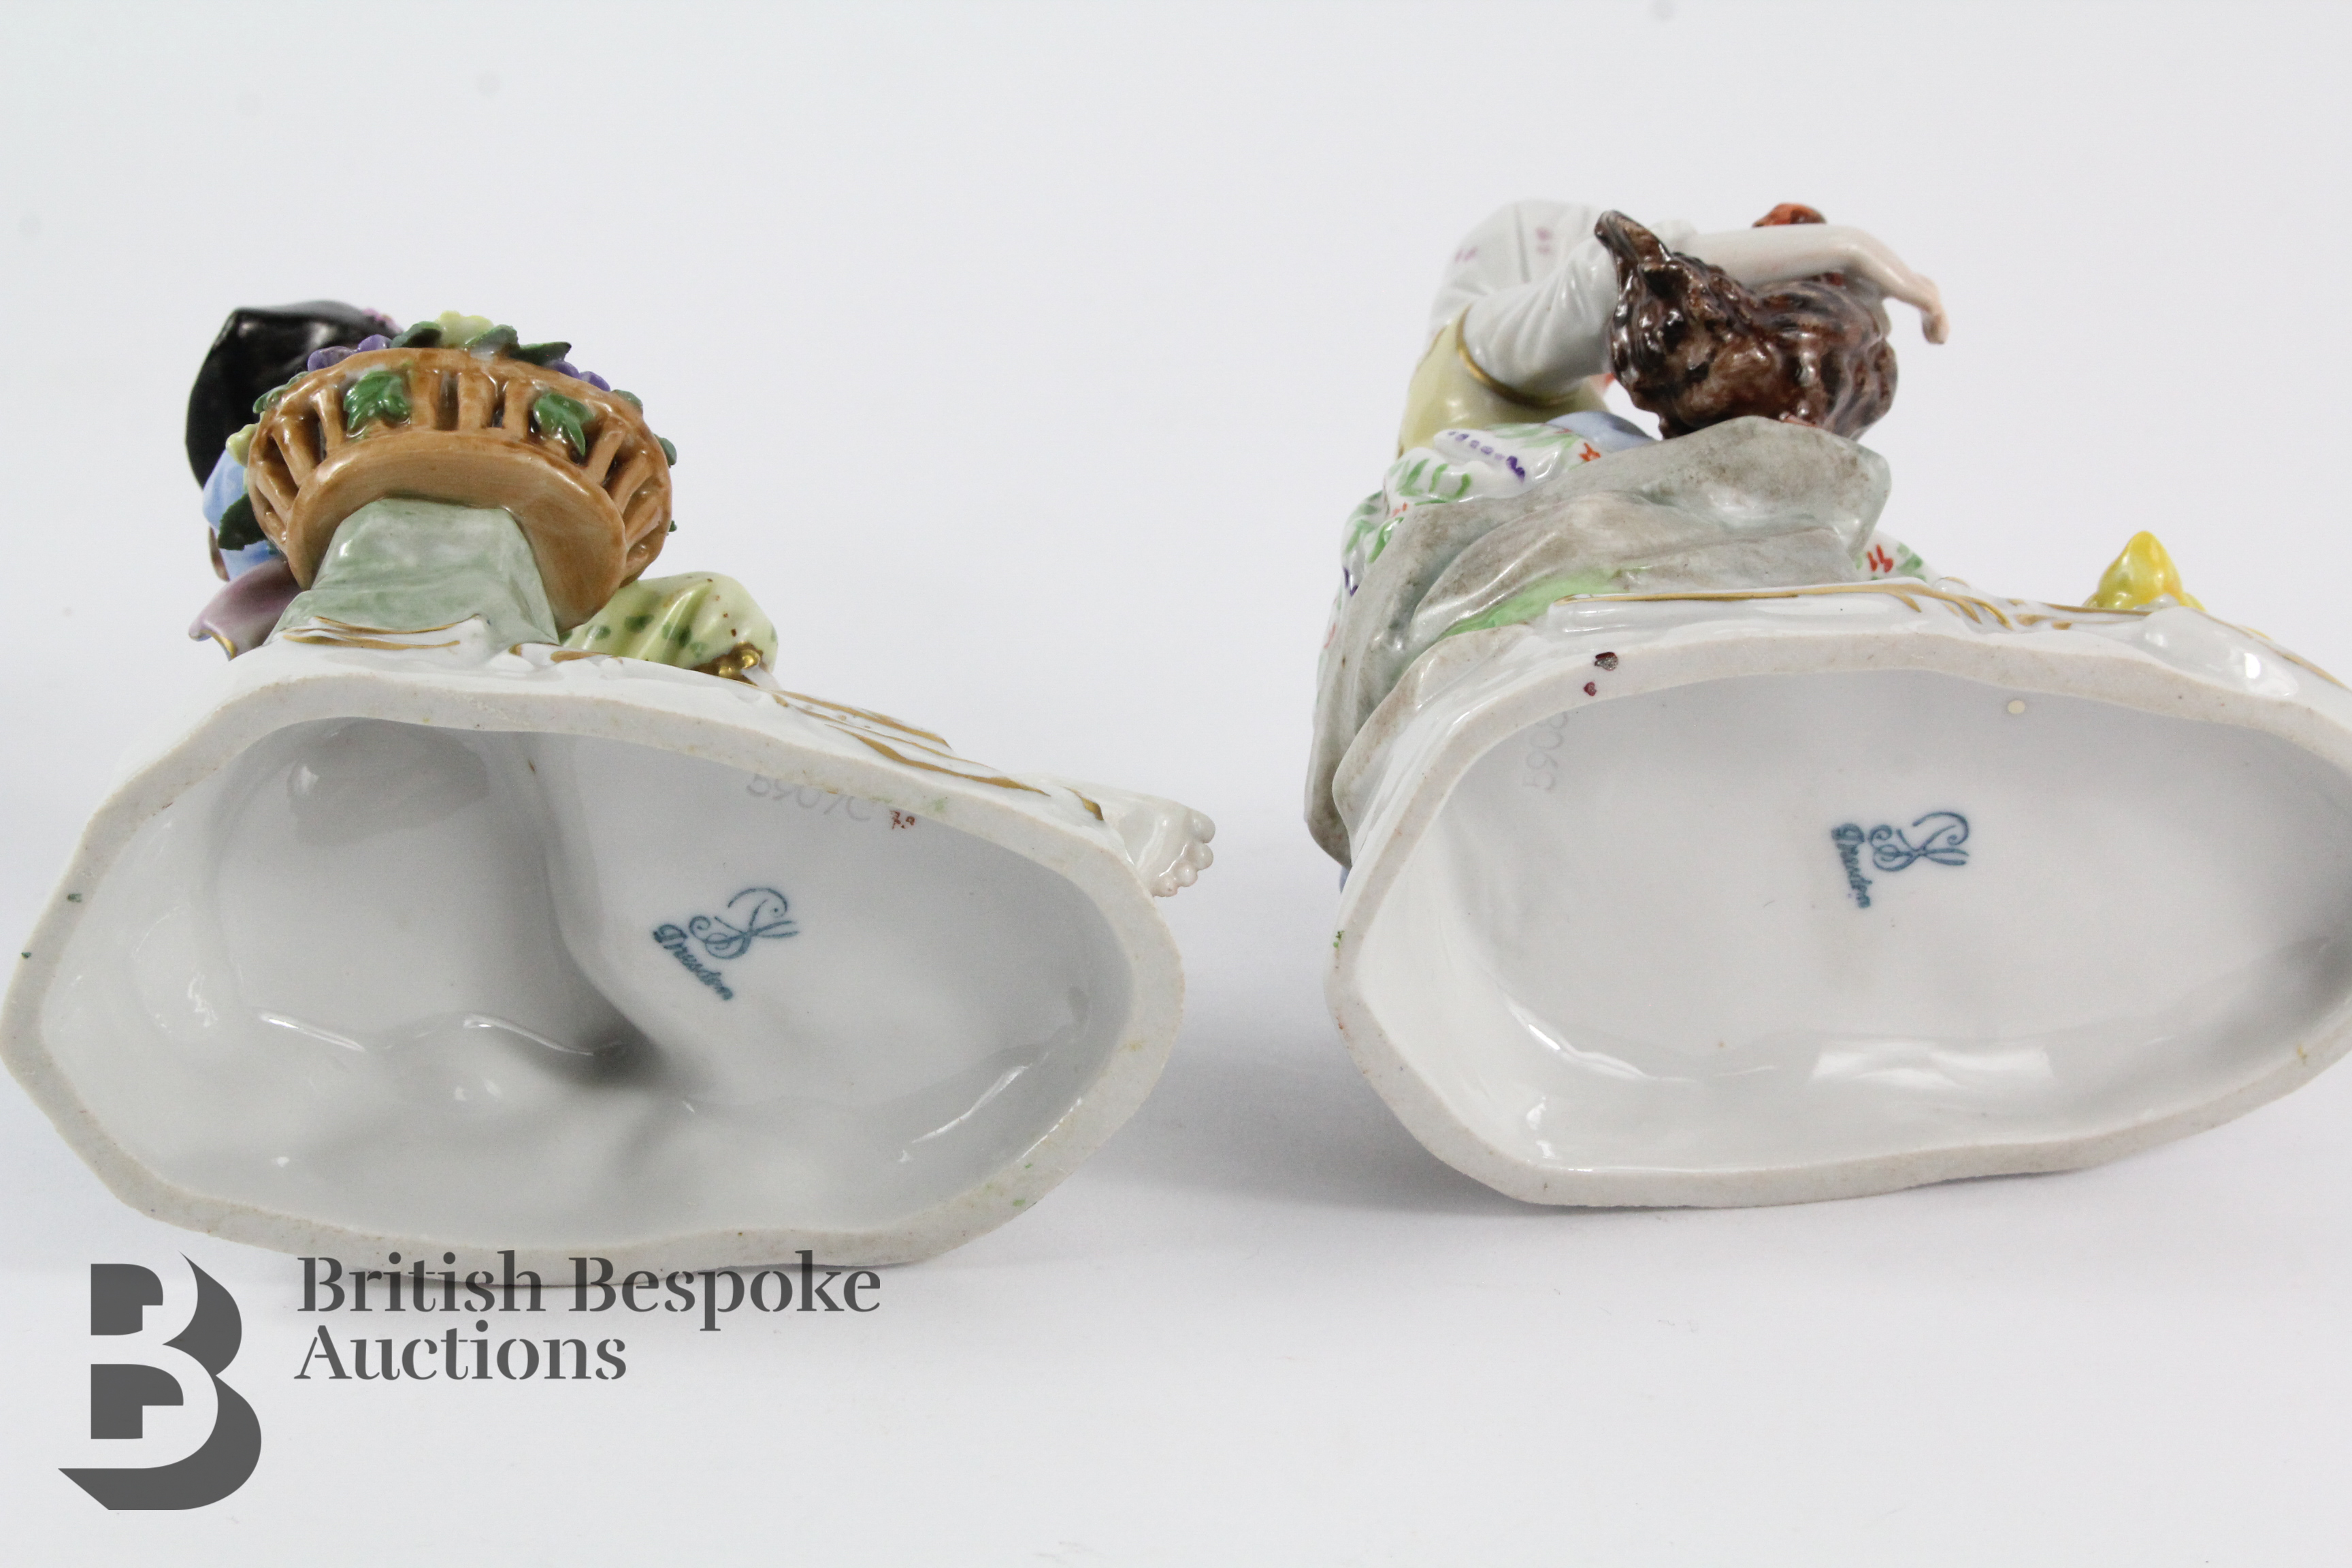 Pair of Porcelain Bocage Figurines - Image 18 of 18